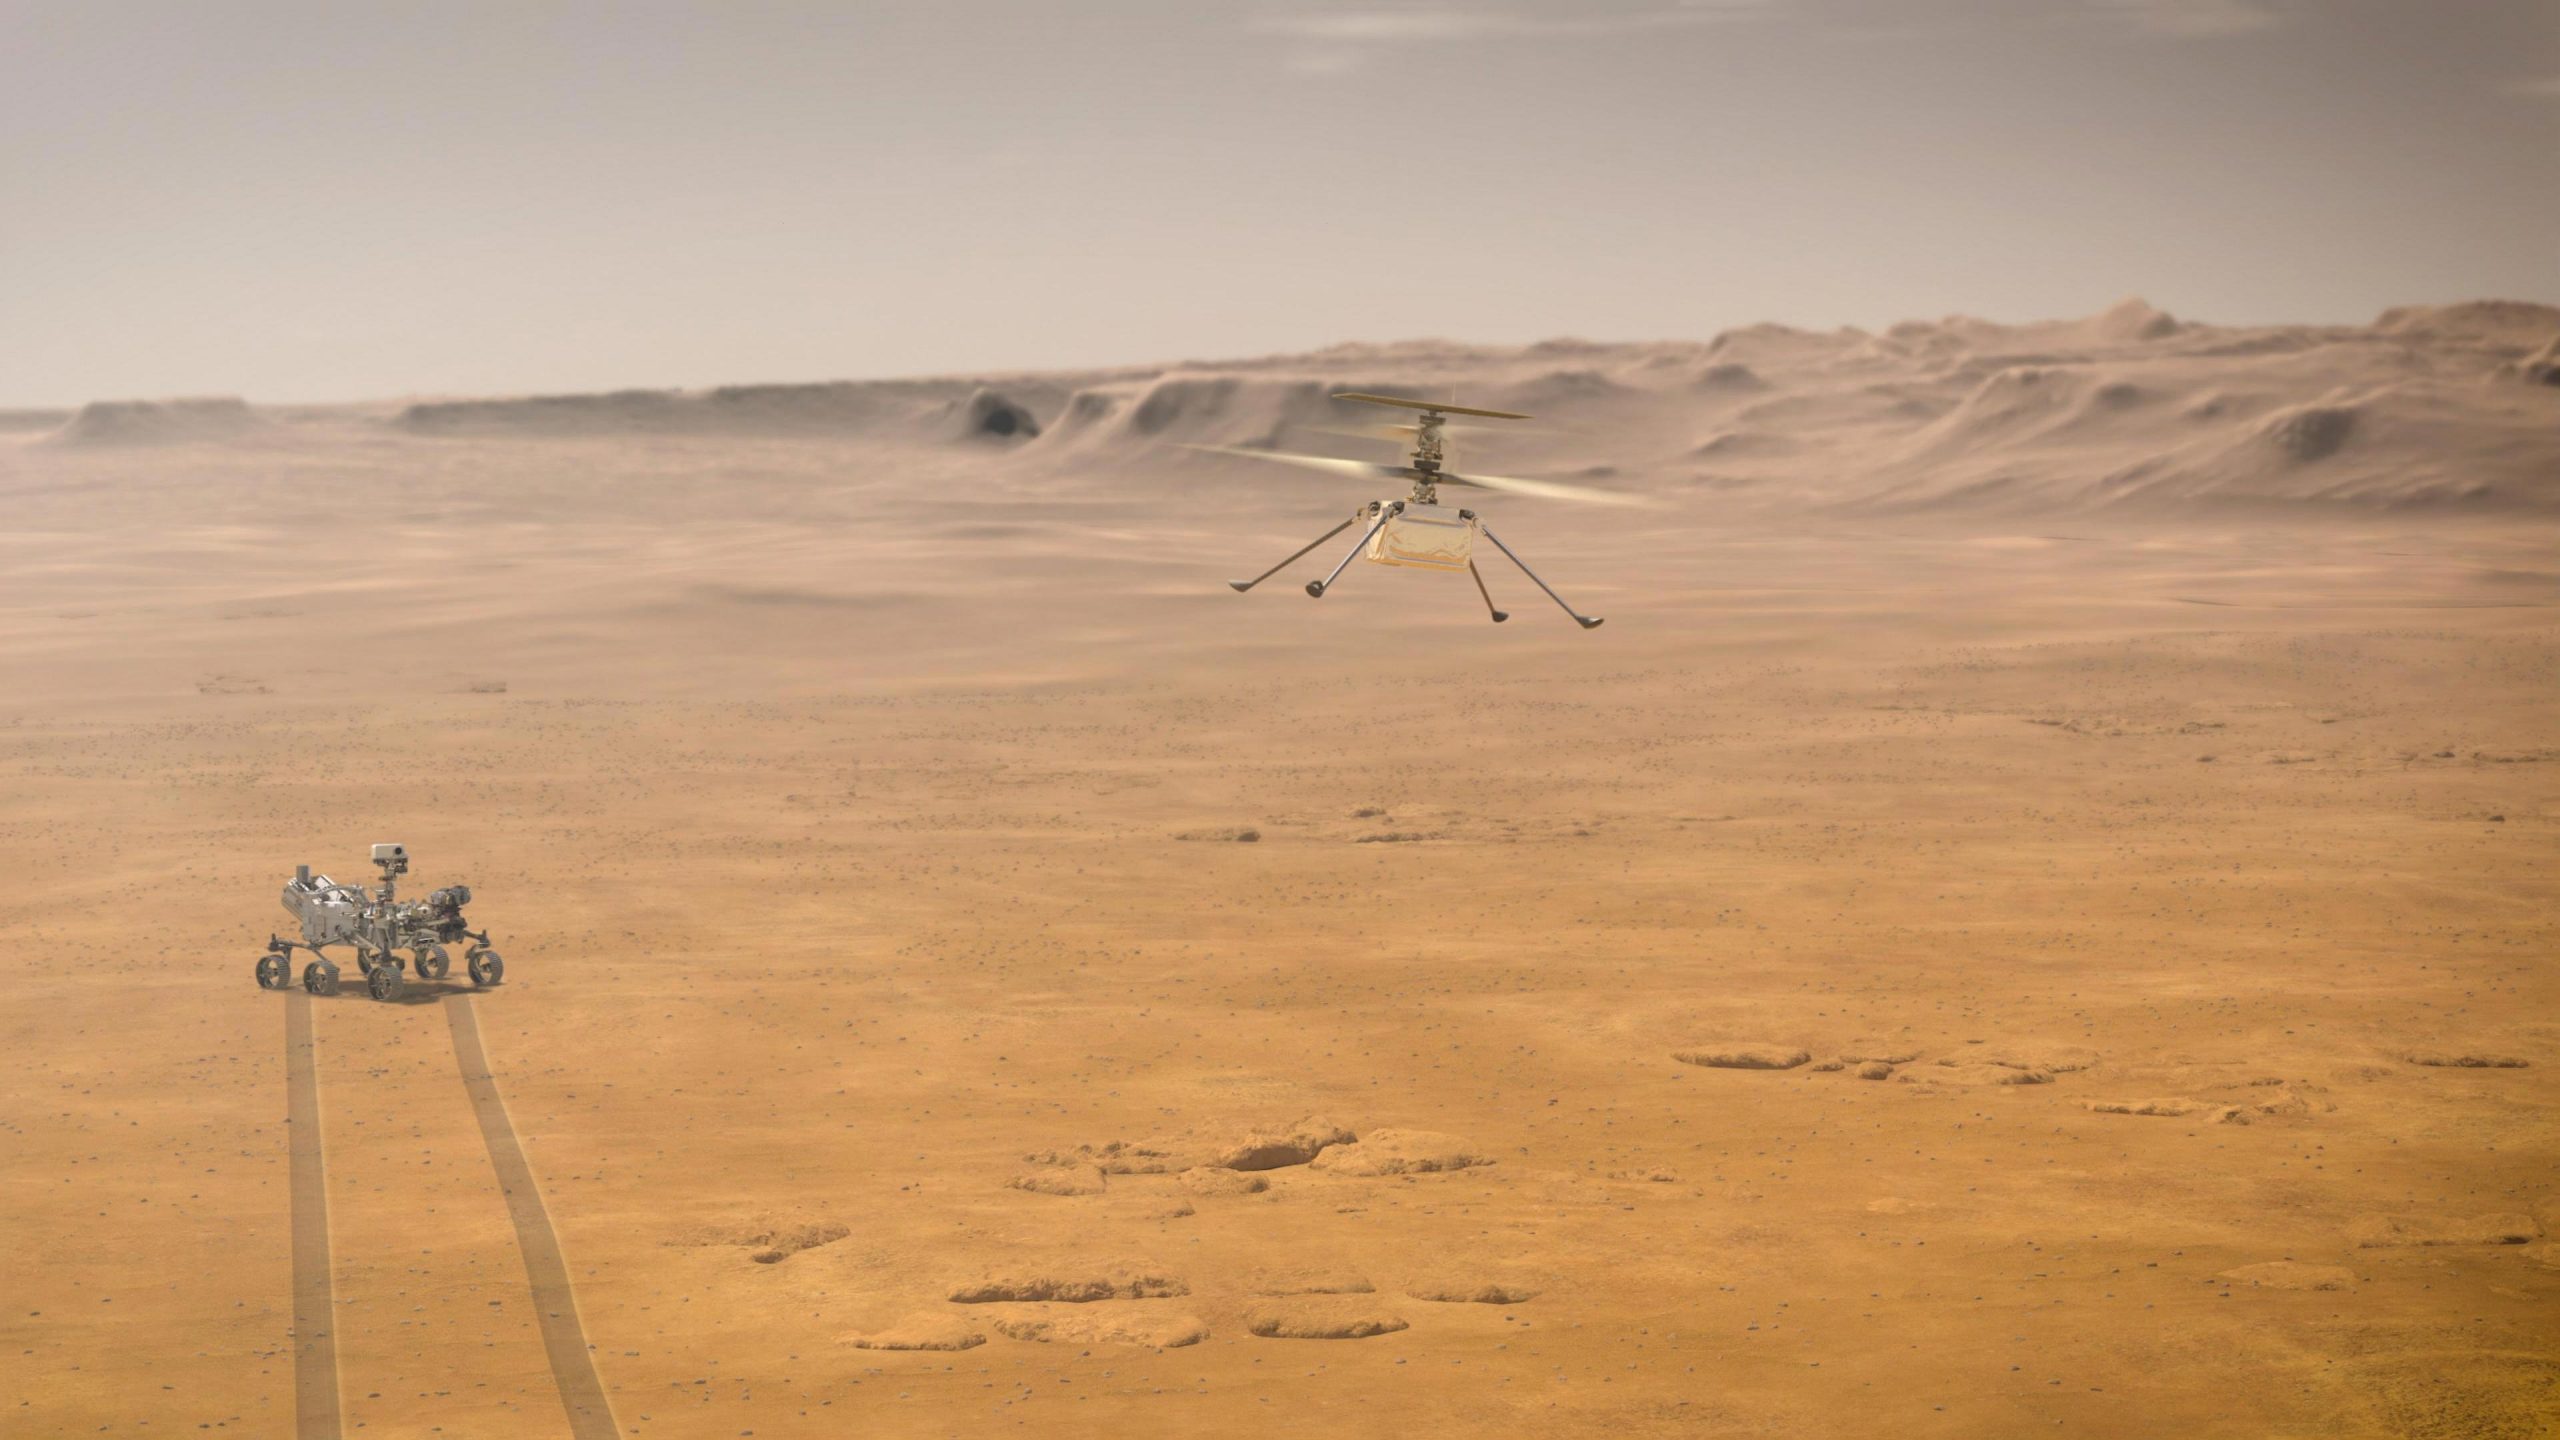 nasa helicopter on mars